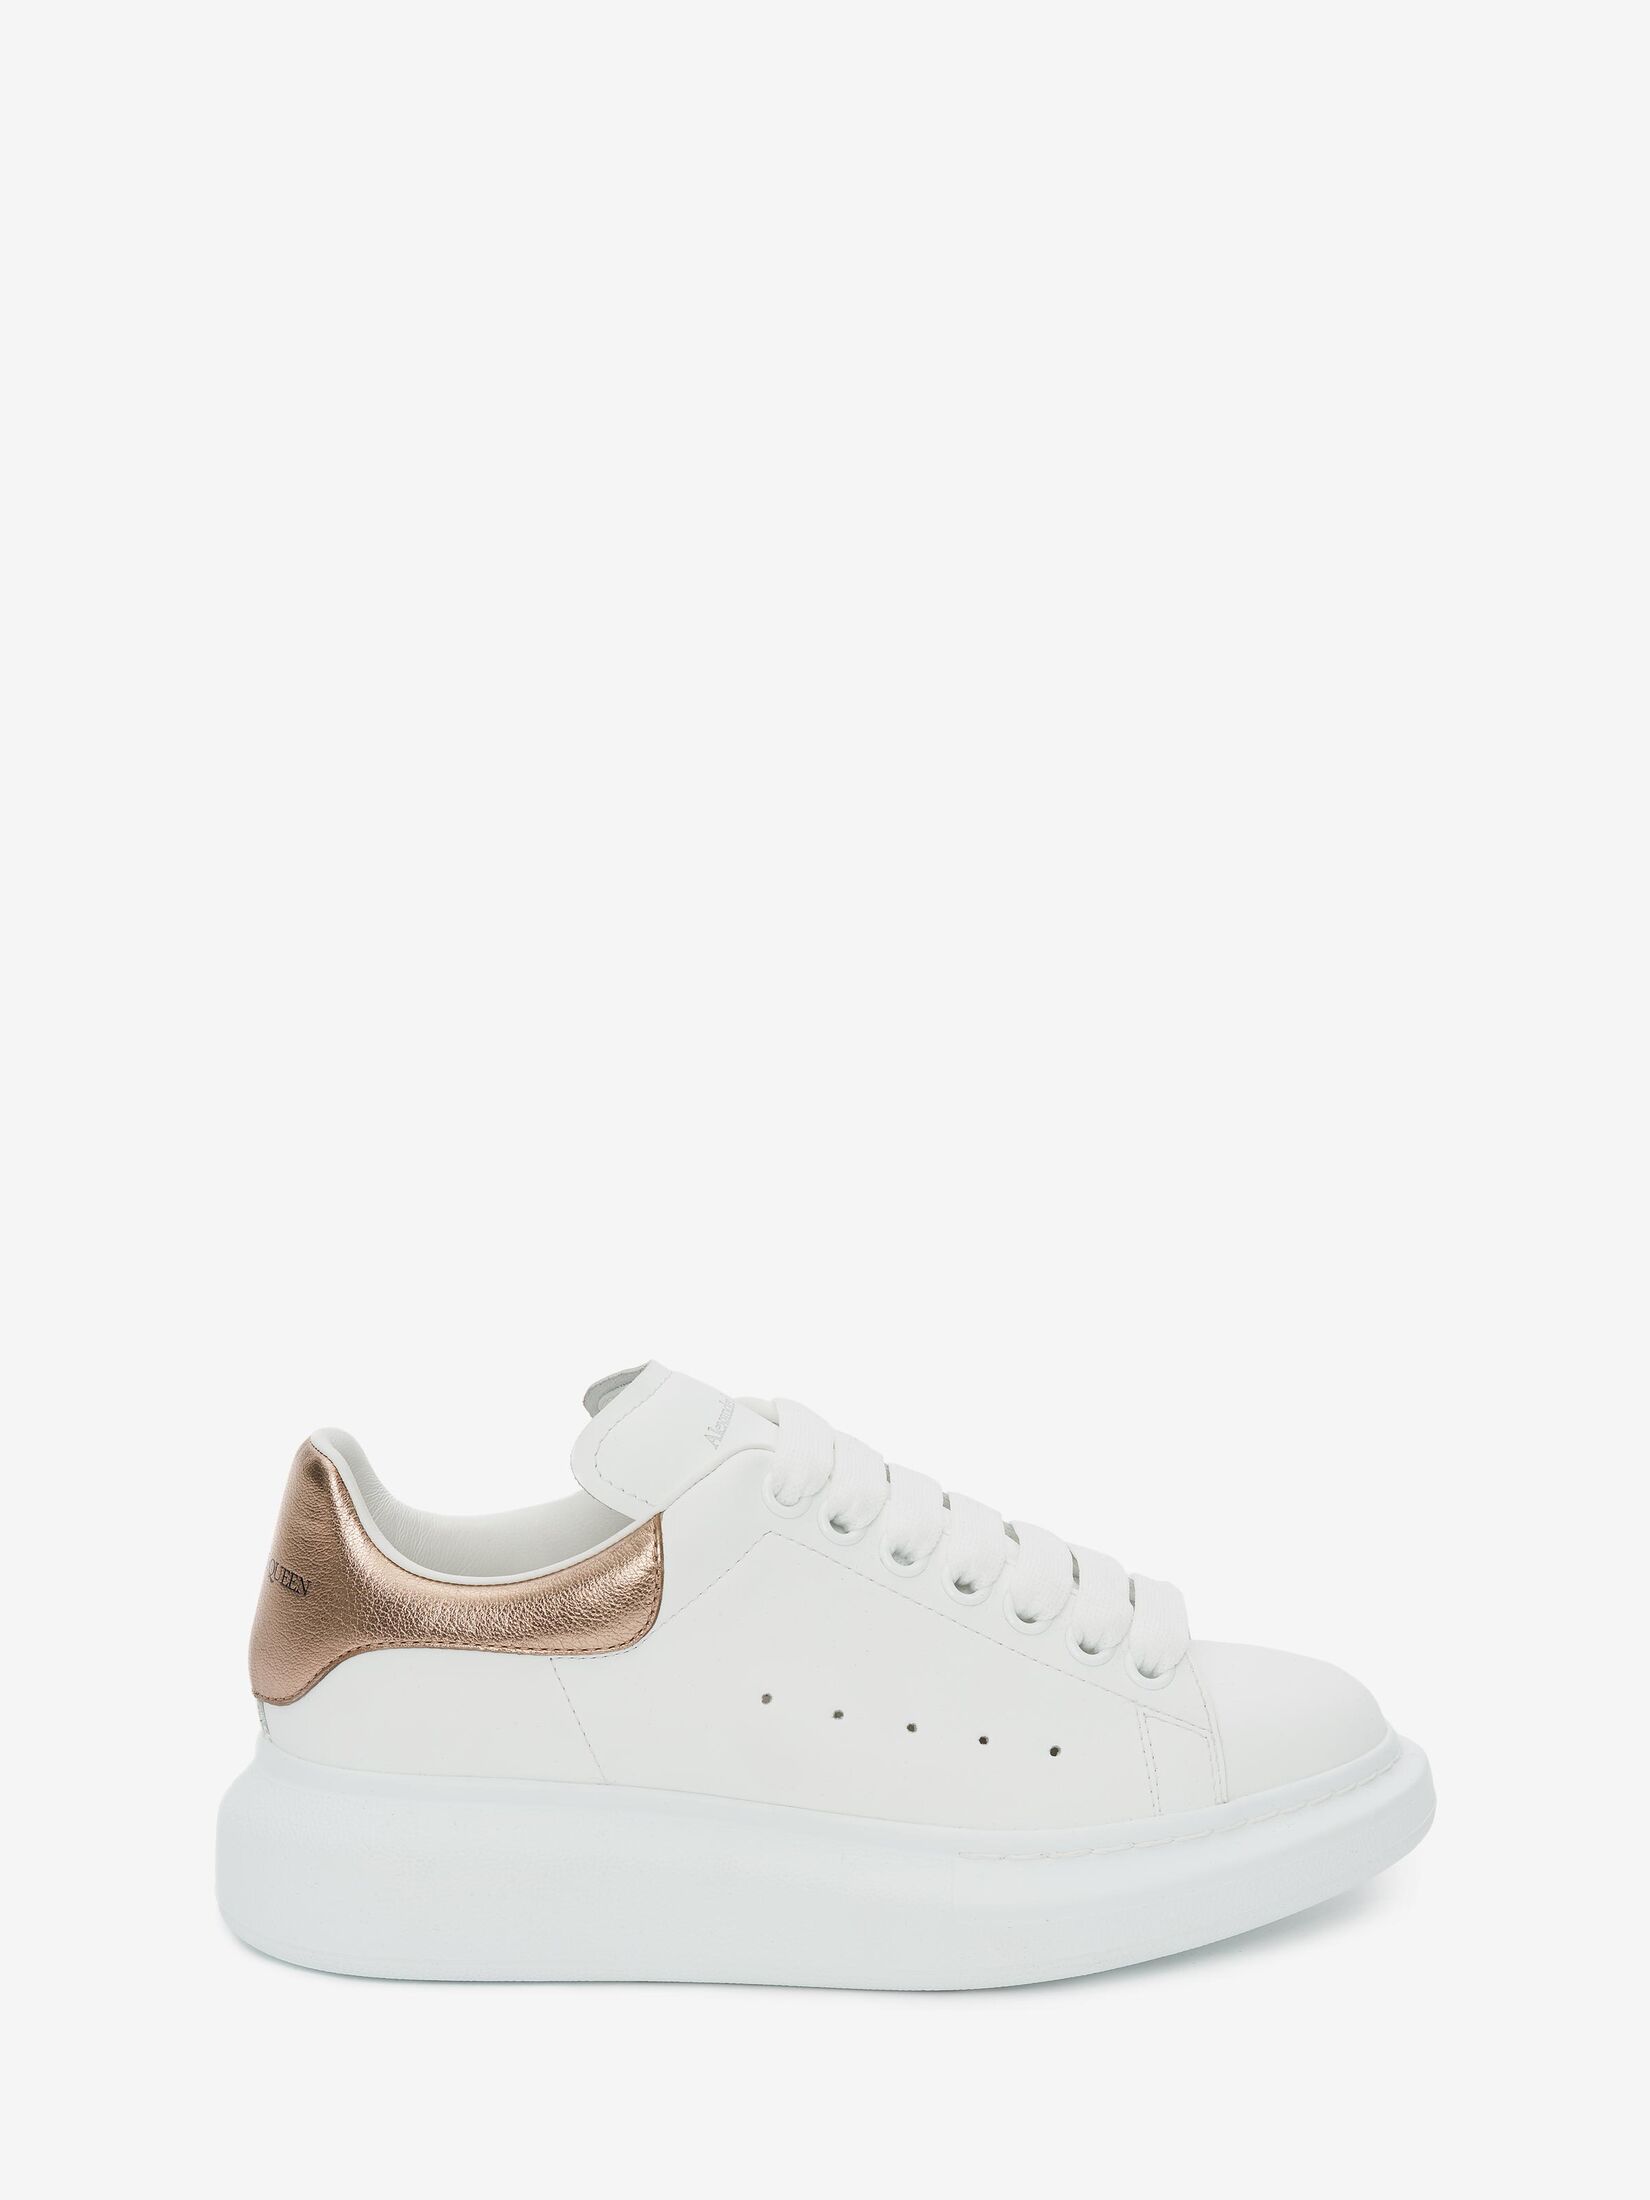 ALEXANDER MCQUEEN Suede-trimmed leather exaggerated-sole sneakers | Alexander  mcqueen shoes, Mcqueen sneakers, Alexander mcqueen sneakers